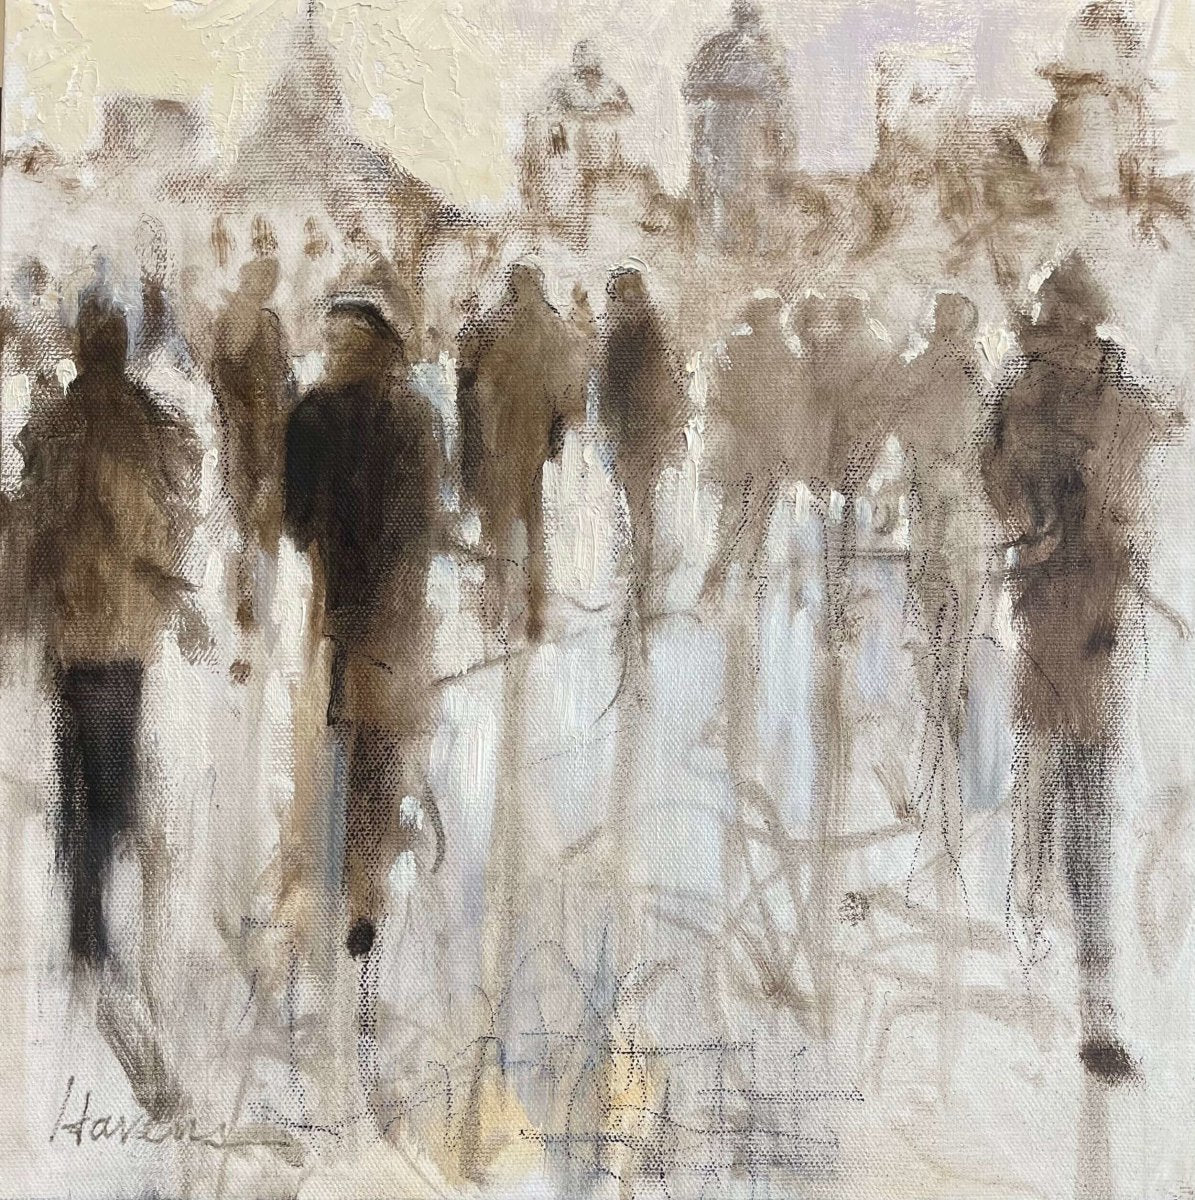 Olde Paris by Betsy Havens at LePrince Galleries